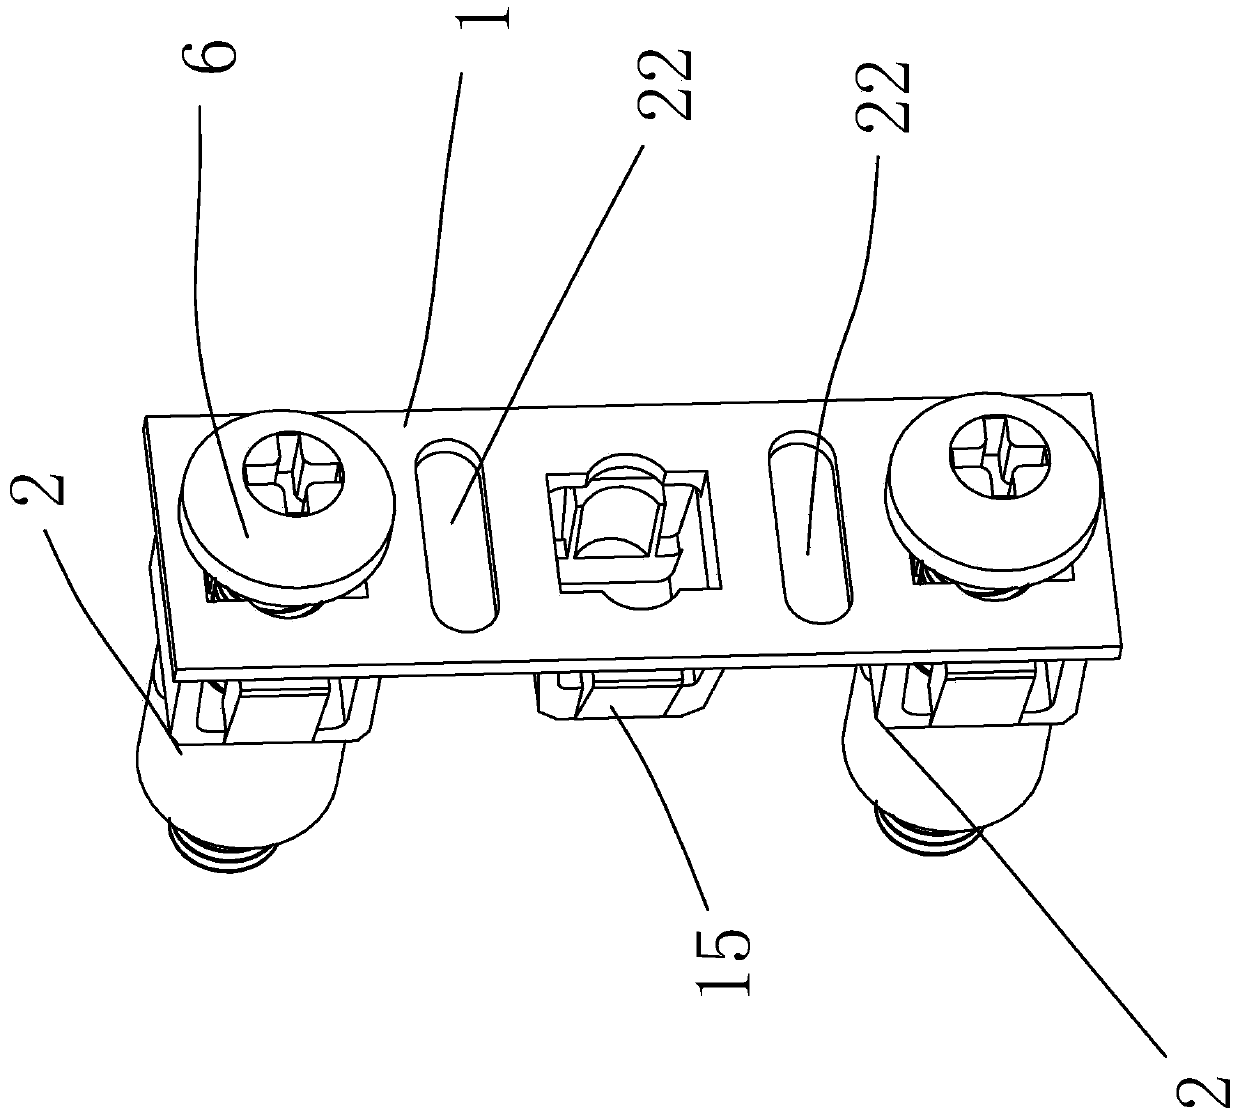 A rack connection accessory and its distribution frame